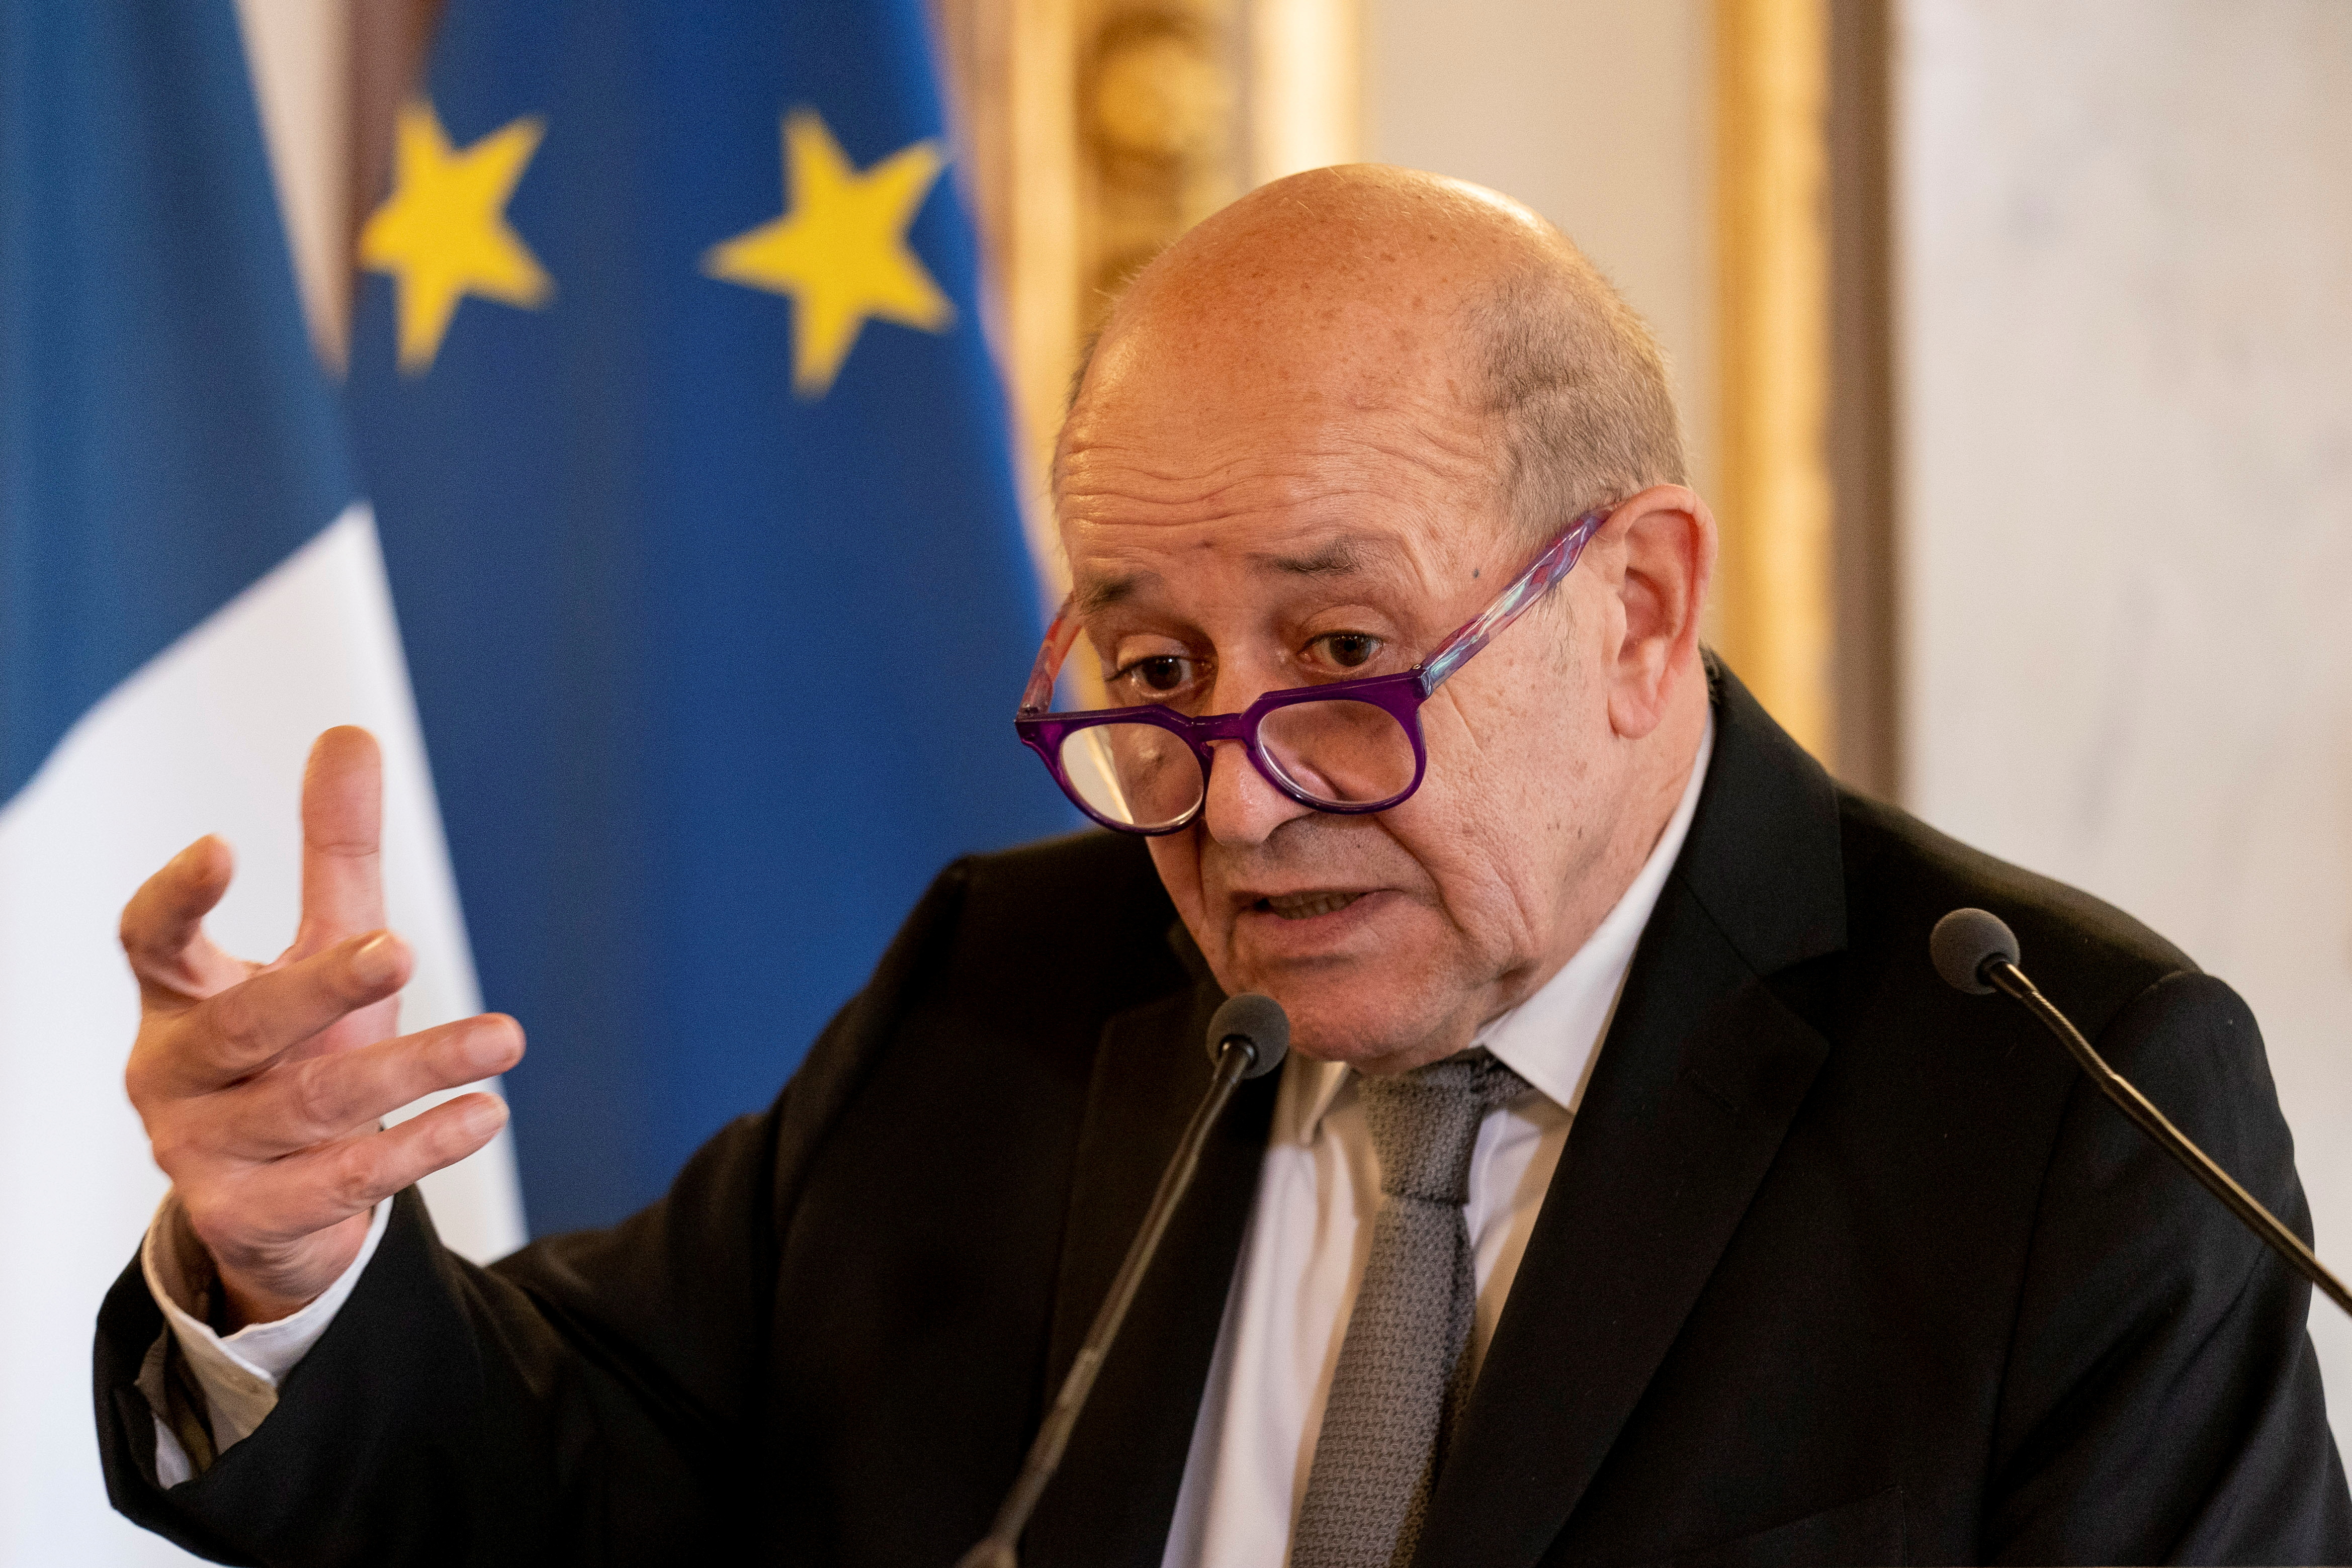 U.S. Secretary of State Antony Blinken, meets with French Foreign Affairs Minister Jean-Yves Le Drian at the French Ministry of Foreign Affairs in Paris